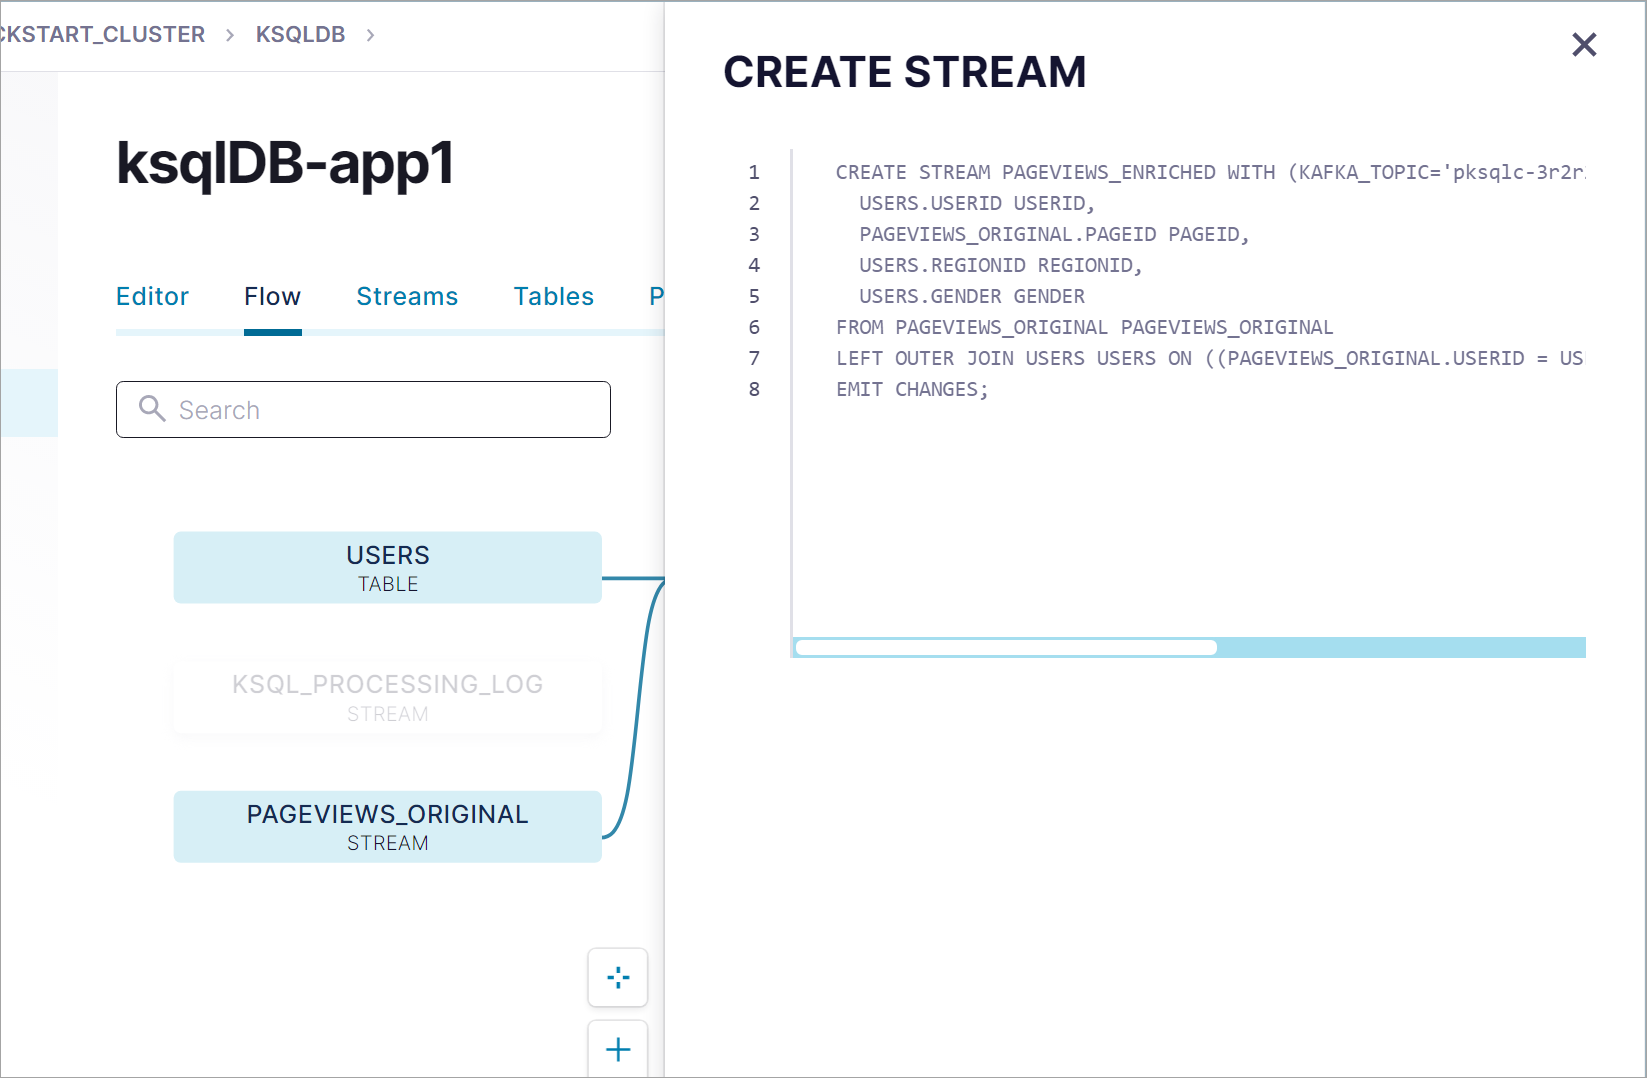 Details of a CREATE STREAM statement in the ksqlDB Flow View in Confluent Cloud